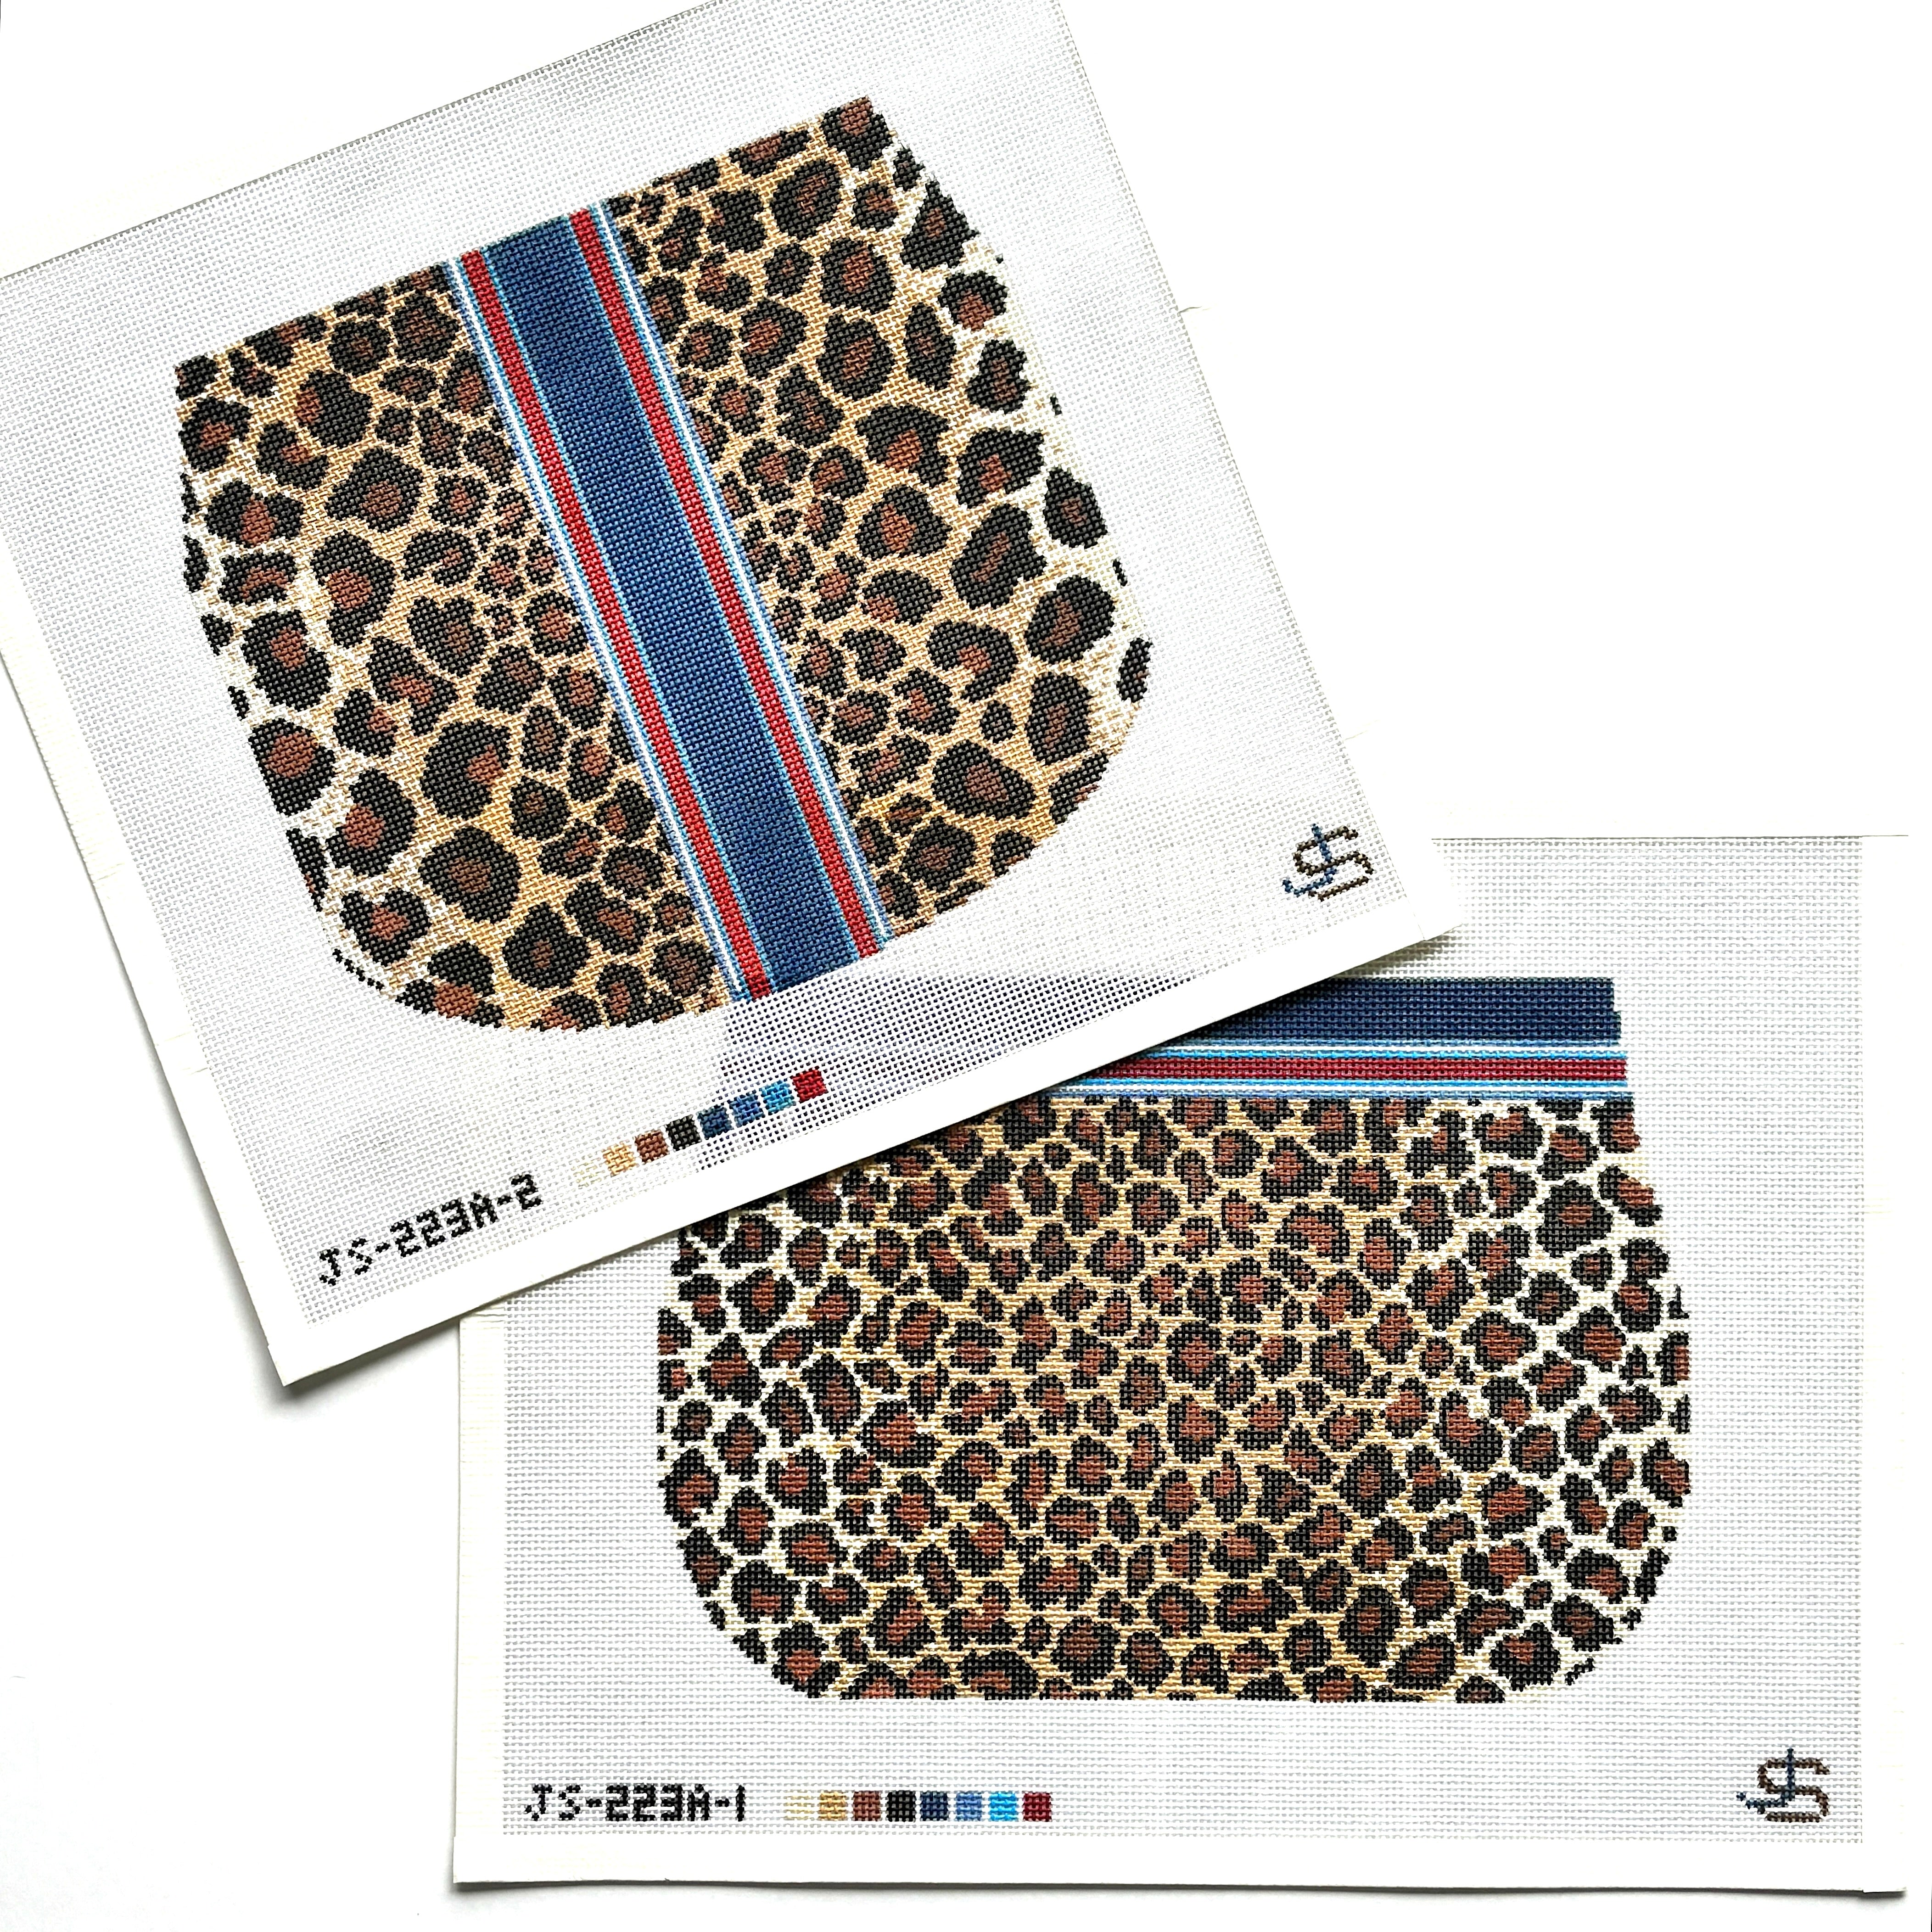 Leopard purse base and flap JS-223A -1 and -2 (2 canvases)